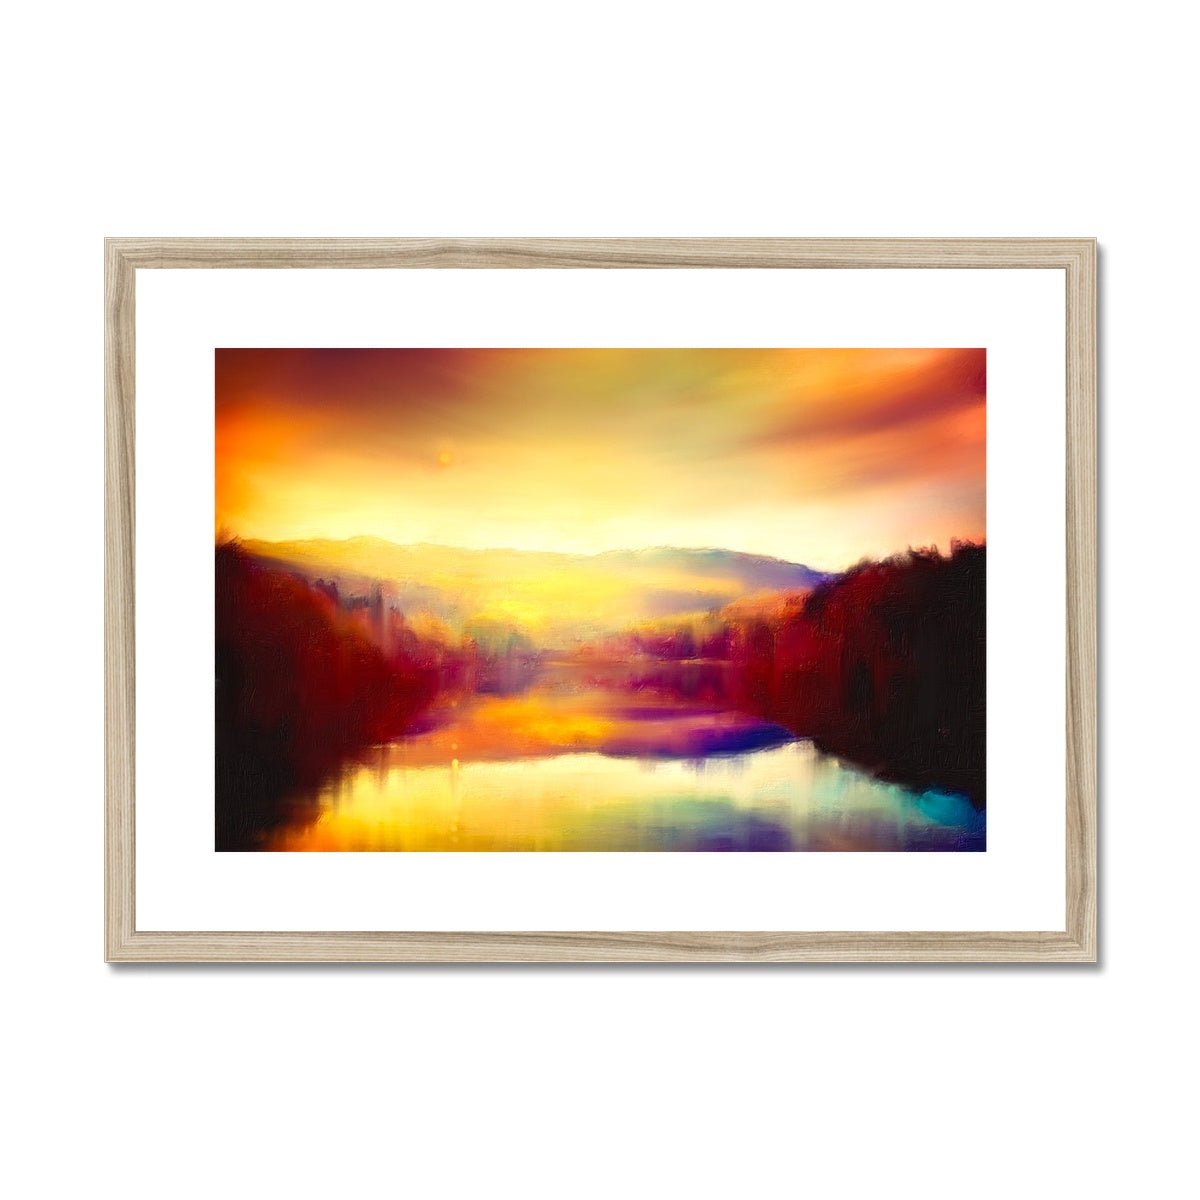 Loch Faskally Dusk Painting | Framed & Mounted Prints From Scotland-Framed & Mounted Prints-Scottish Lochs & Mountains Art Gallery-A2 Landscape-Natural Frame-Paintings, Prints, Homeware, Art Gifts From Scotland By Scottish Artist Kevin Hunter